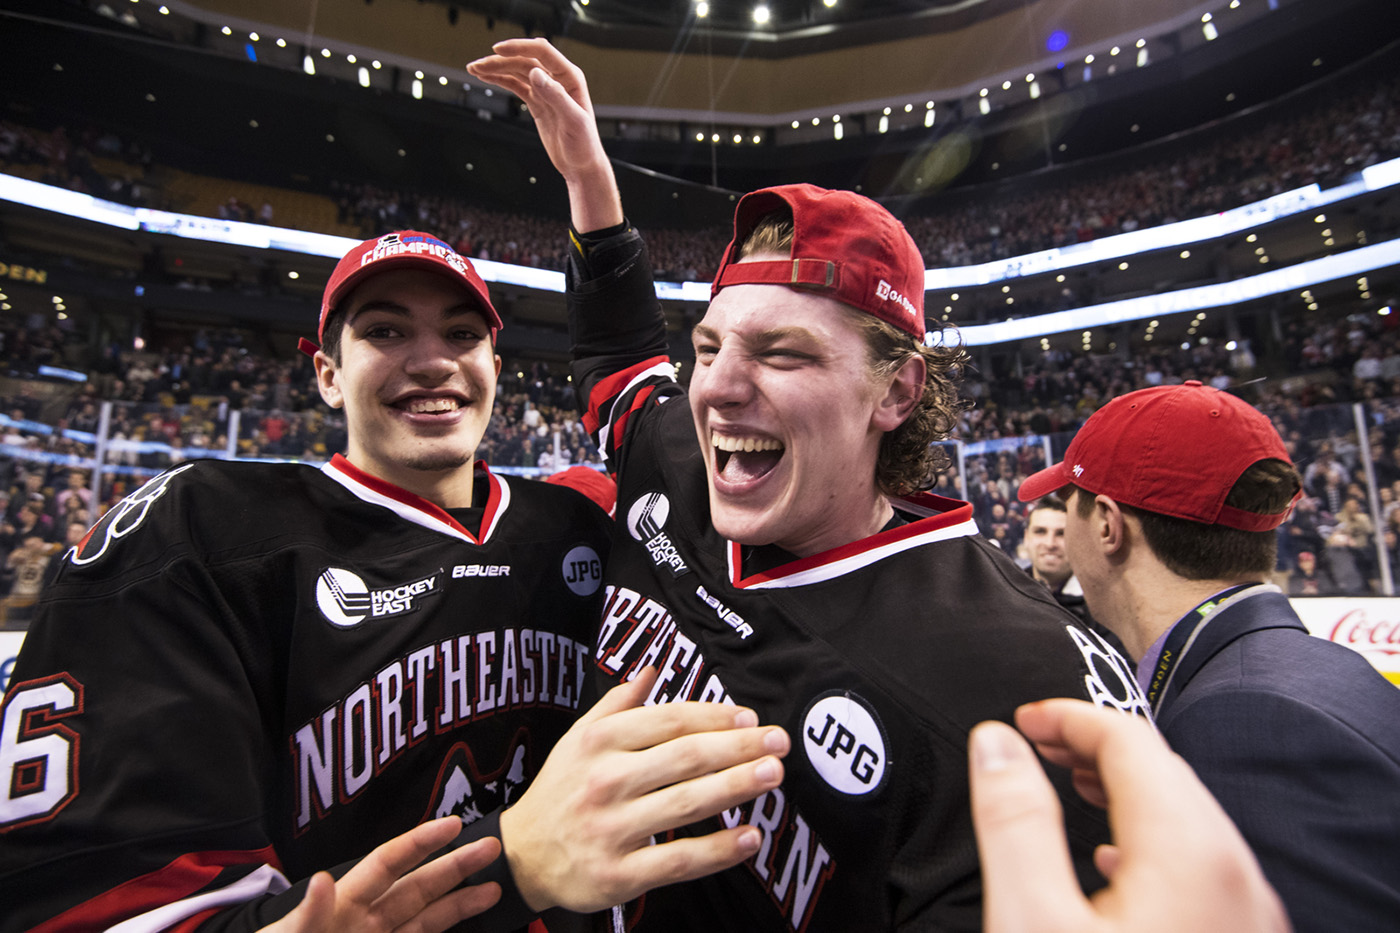 Full Coverage of the 2018 Beanpot Final - News @ Northeastern